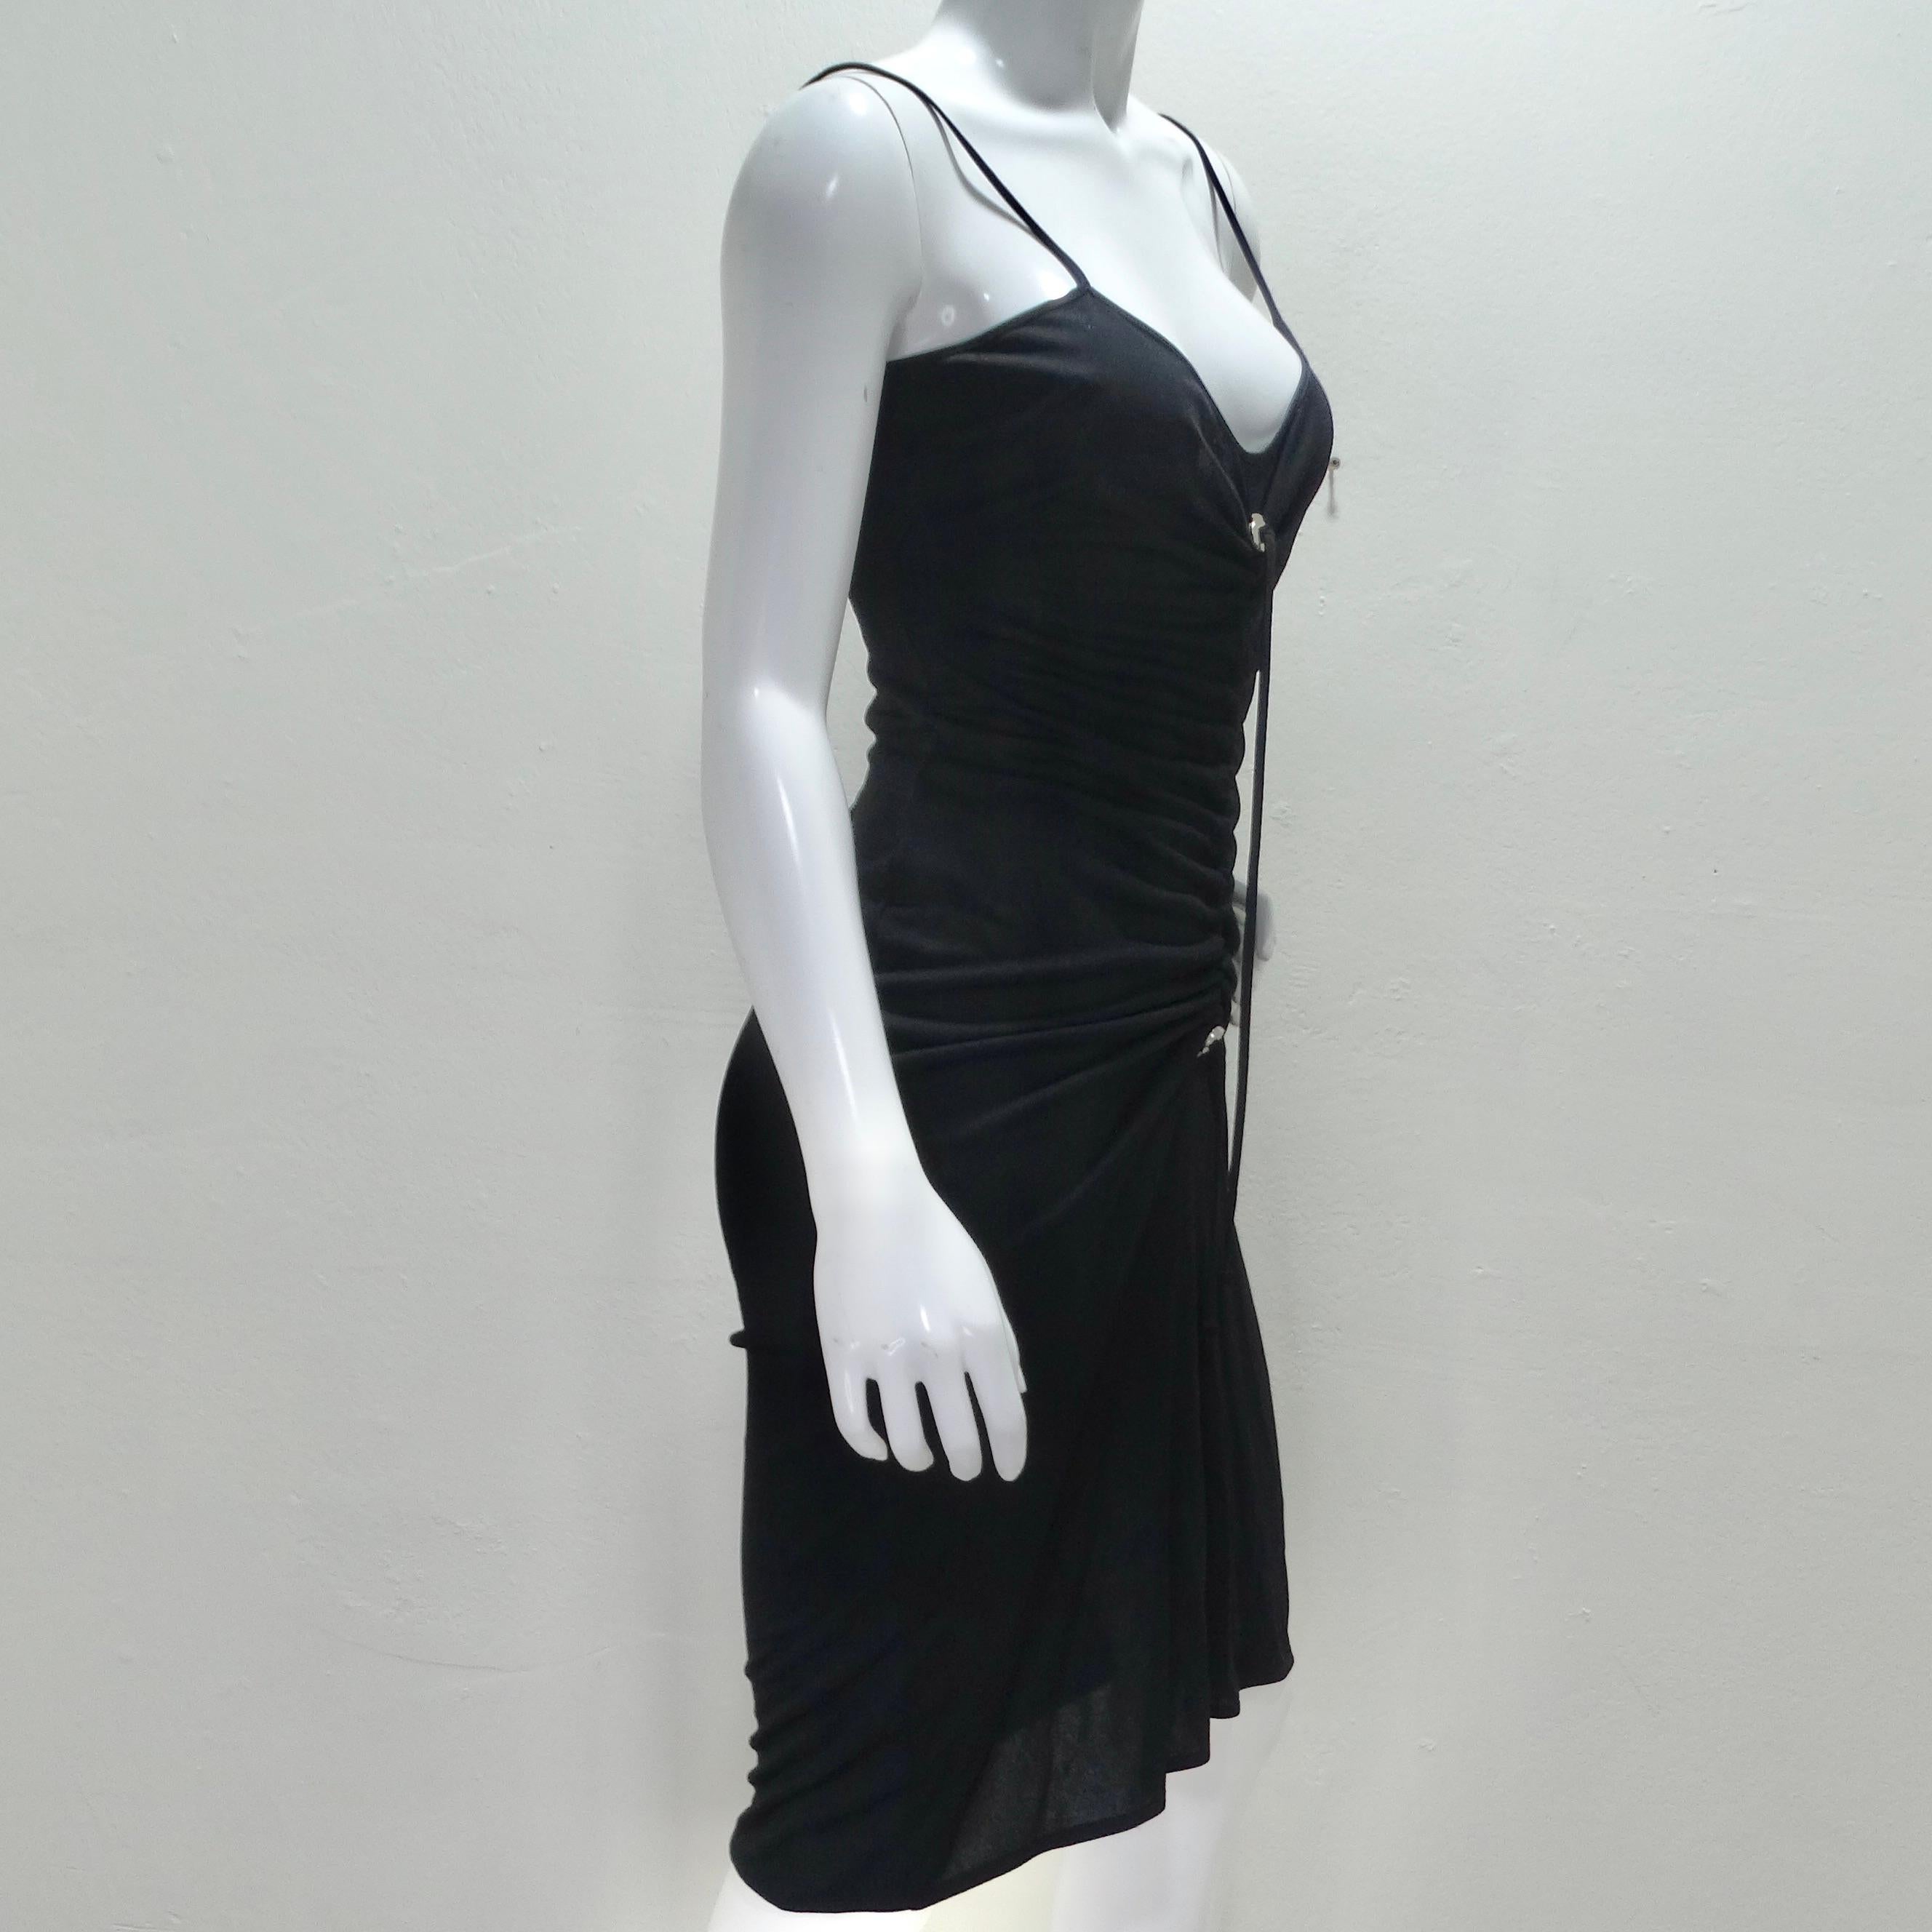 Moschino Cheap And Chic Drawstring Little Black Dress In Good Condition For Sale In Scottsdale, AZ